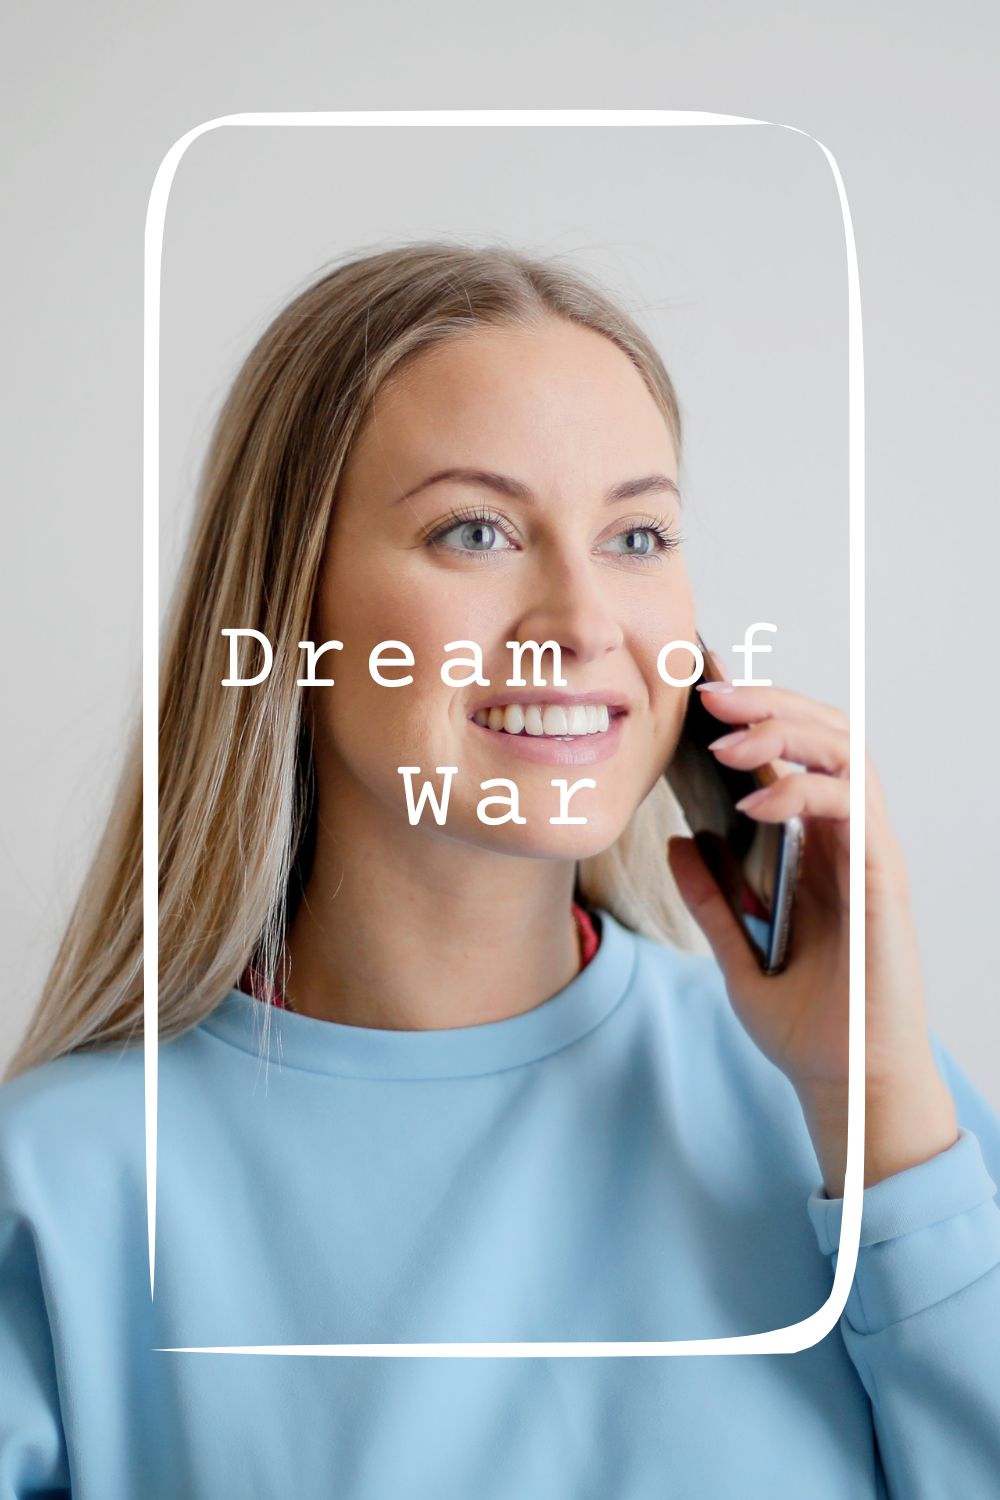 10 Dreaming of Receiving Call Or Calling Someone Meanings1